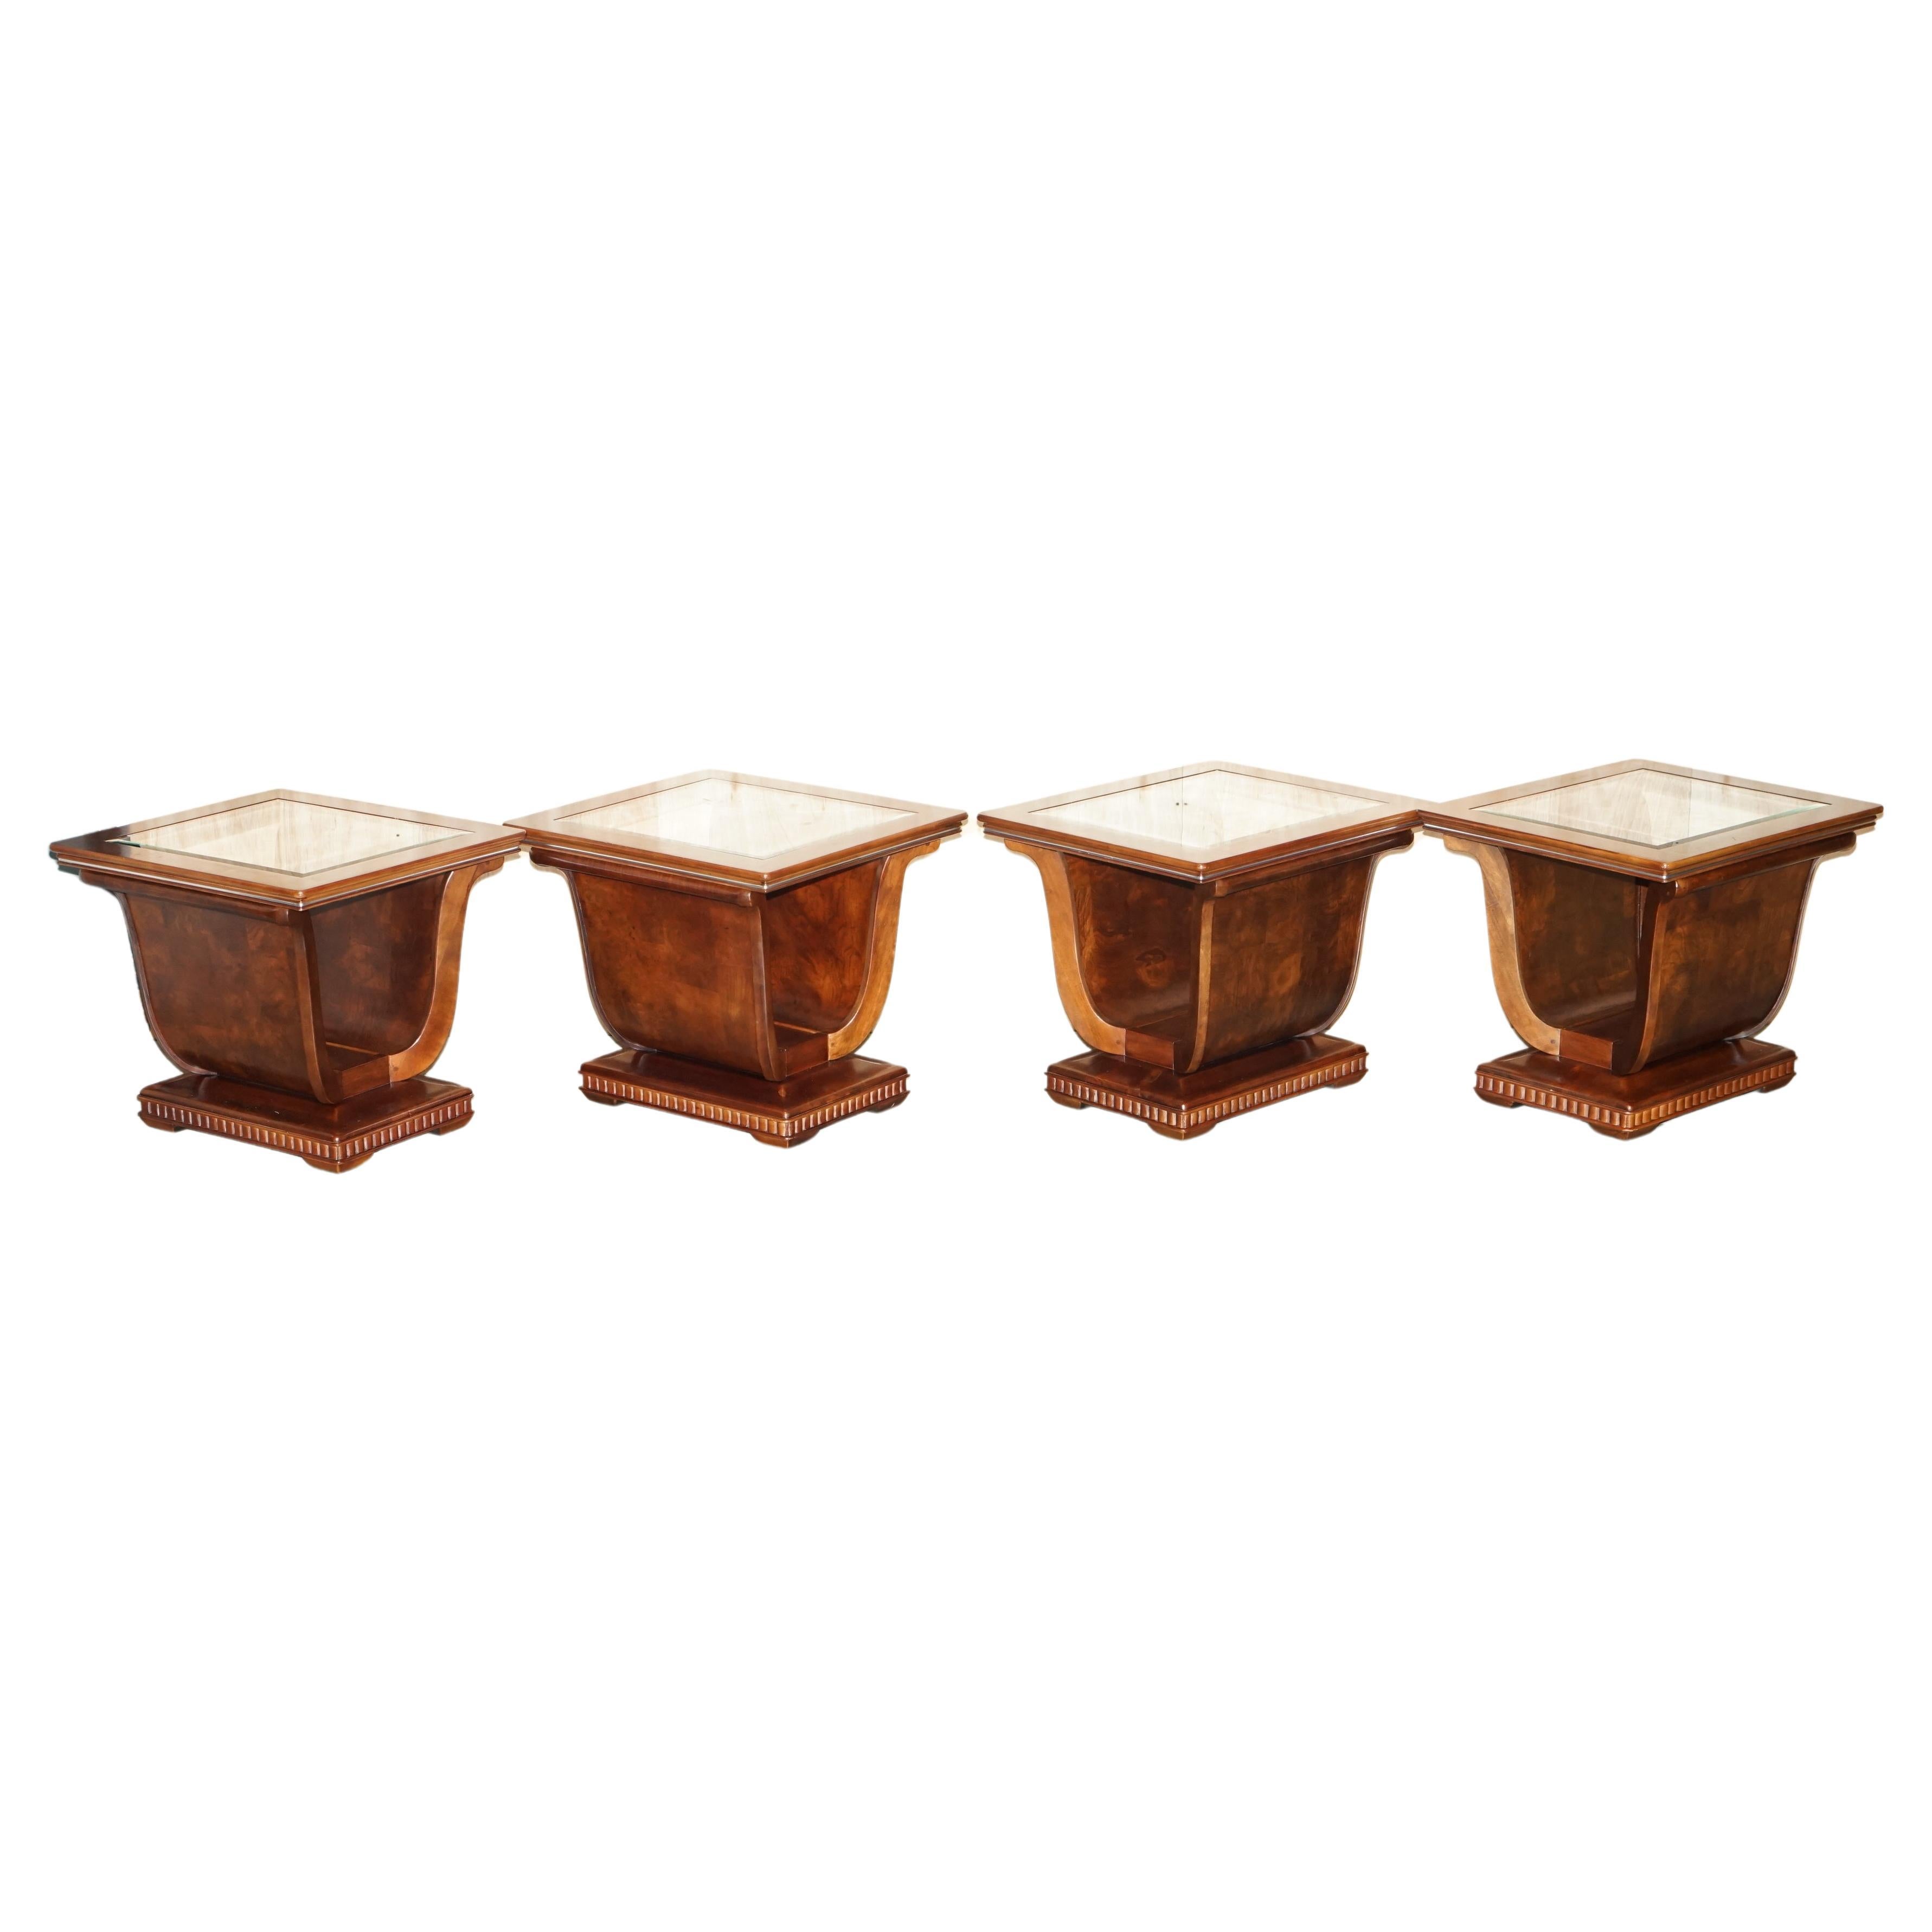 Royal House Antiques

Royal House Antiques is delighted to offer for sale this lovely suite of four, Tulip shaped, bevelled glass topped, Burr Elm large side tables with hidden base storage 

Please note the delivery fee listed is just a guide, it